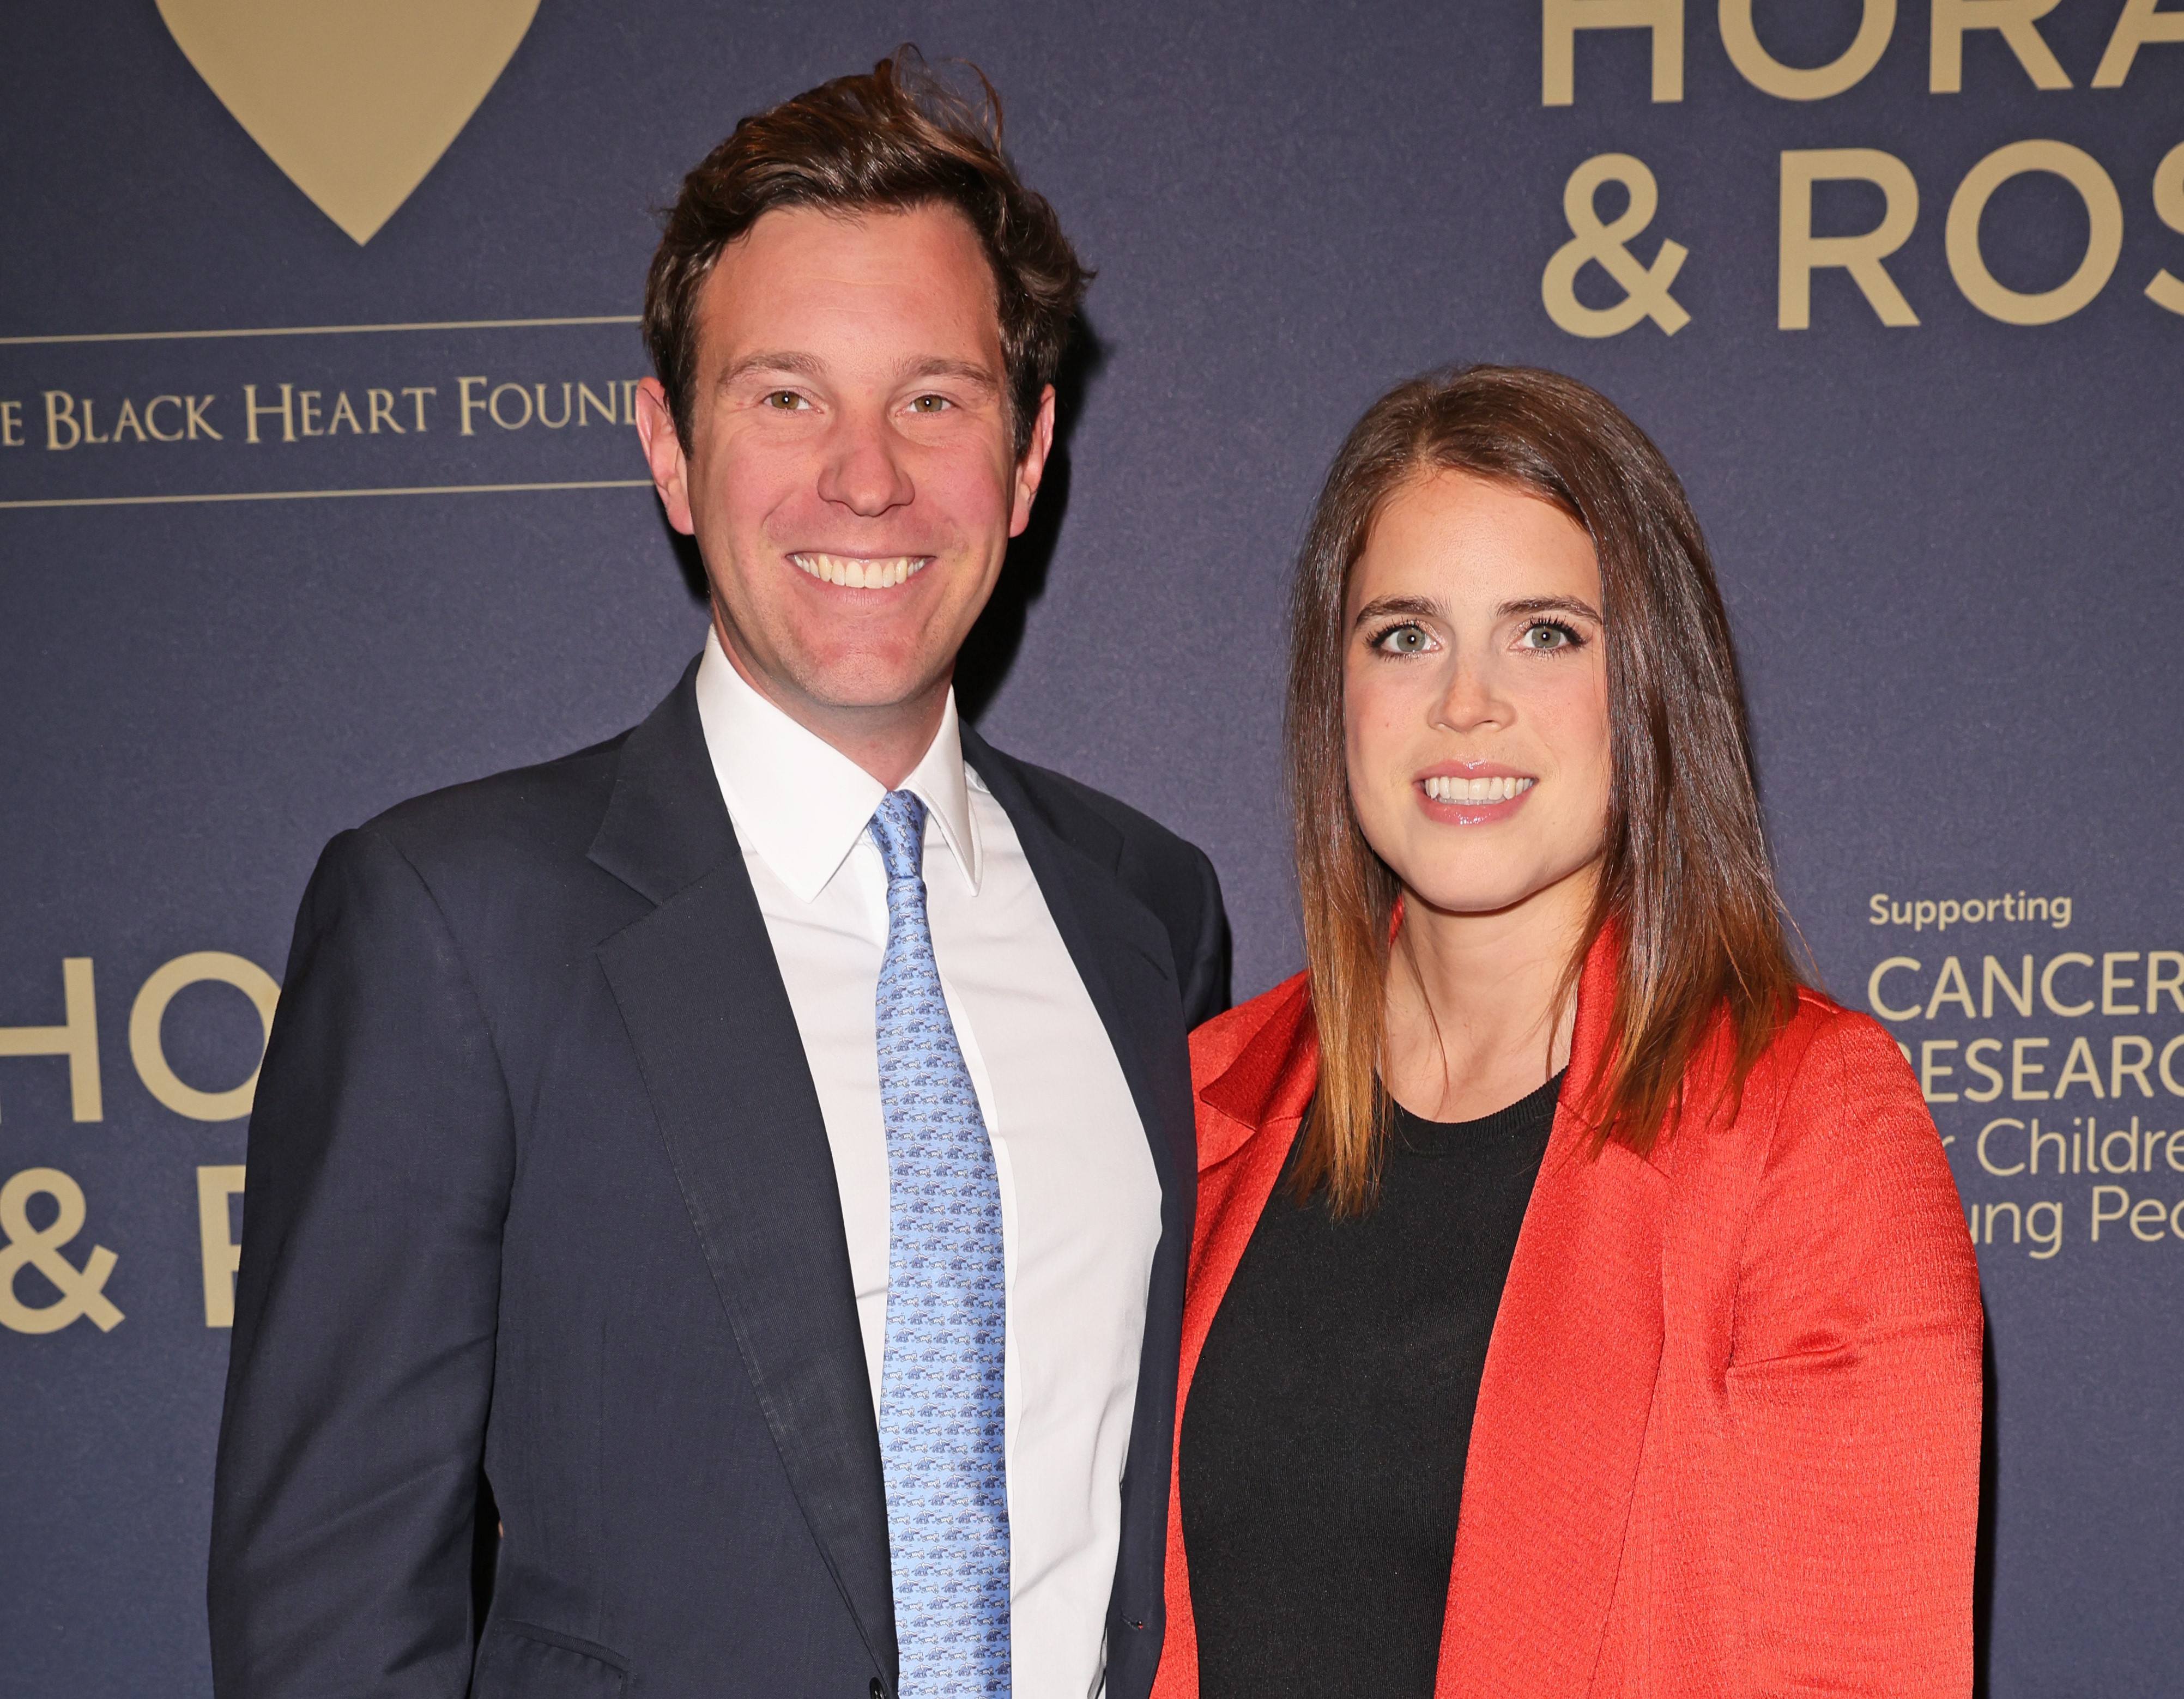 Jack Brooksbank and Princess Eugenie, who are moving to Nottingham Cottage, attend the Horan & Rose Show 'Modest!'